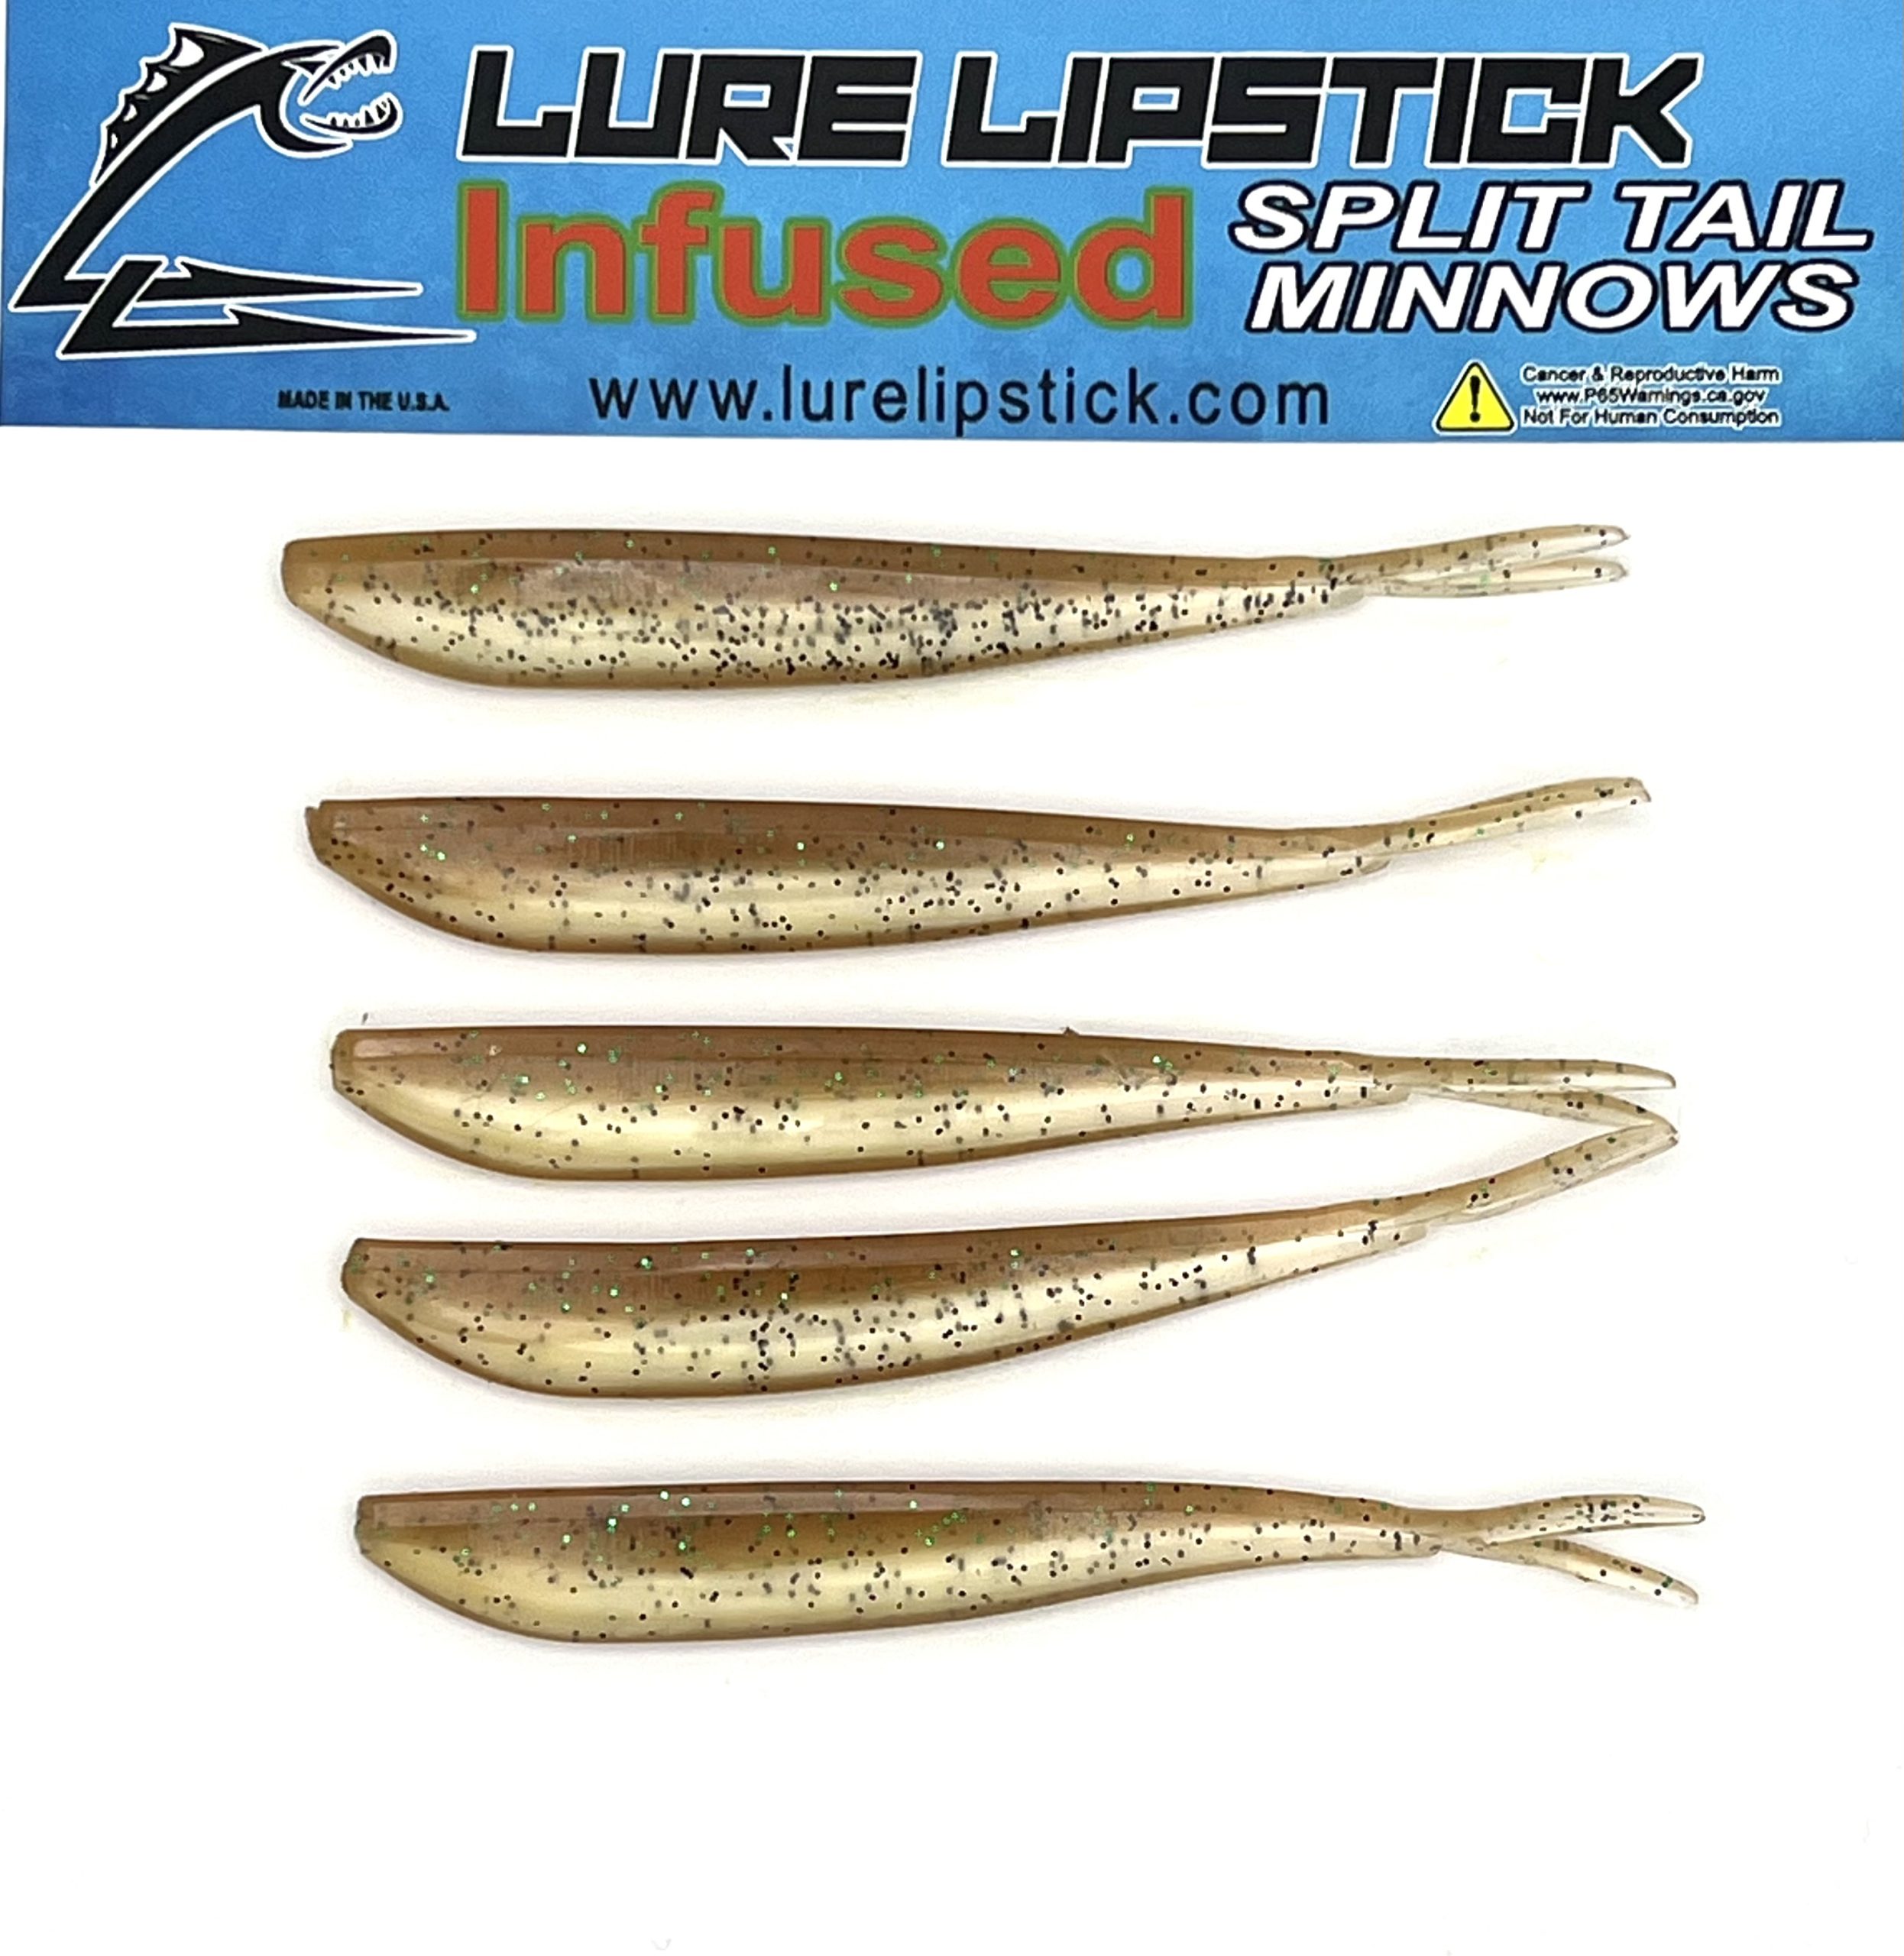 4 INCH 5 PACK CUSTOM SCENTED SPLIT TAIL MINNOWS - MELON BELLY